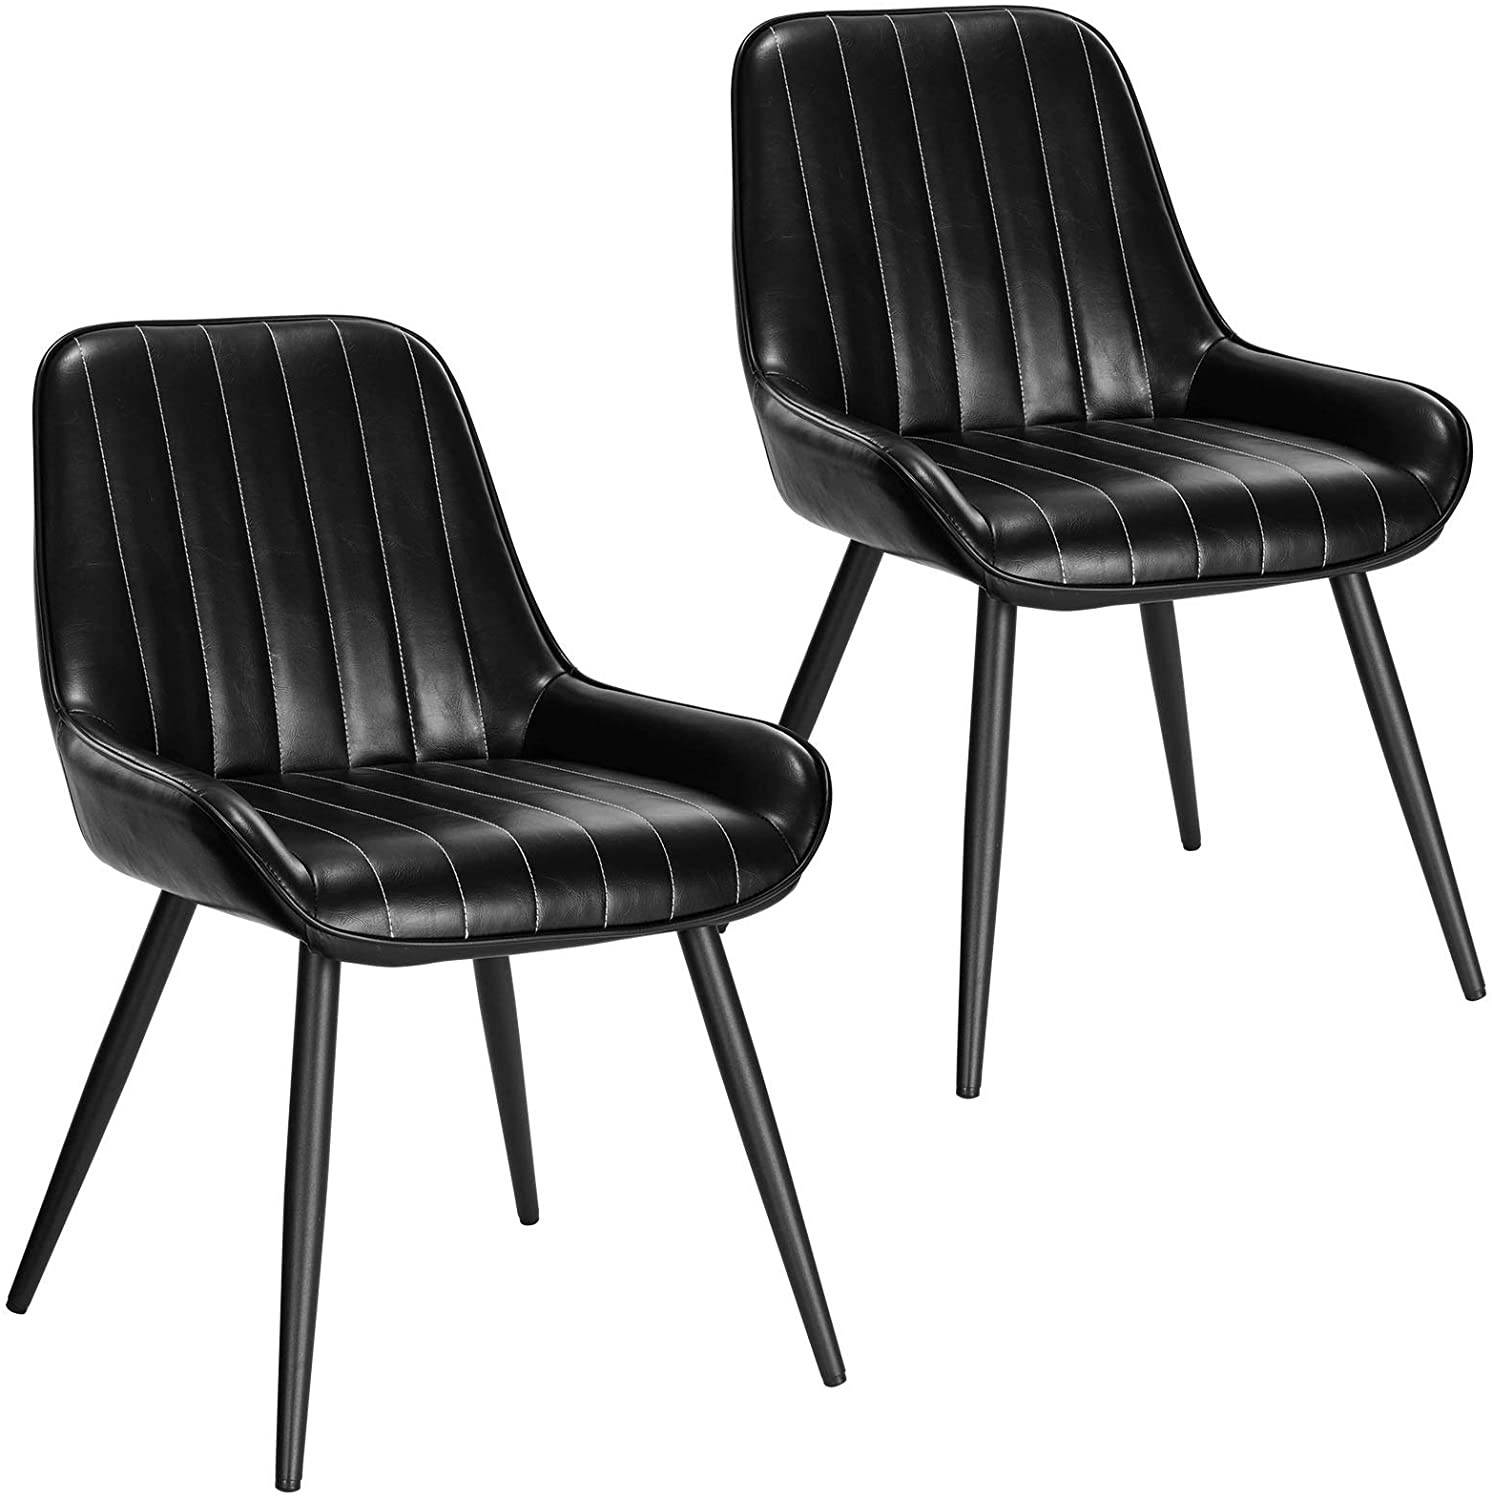 Black faux leather kitchen chairs